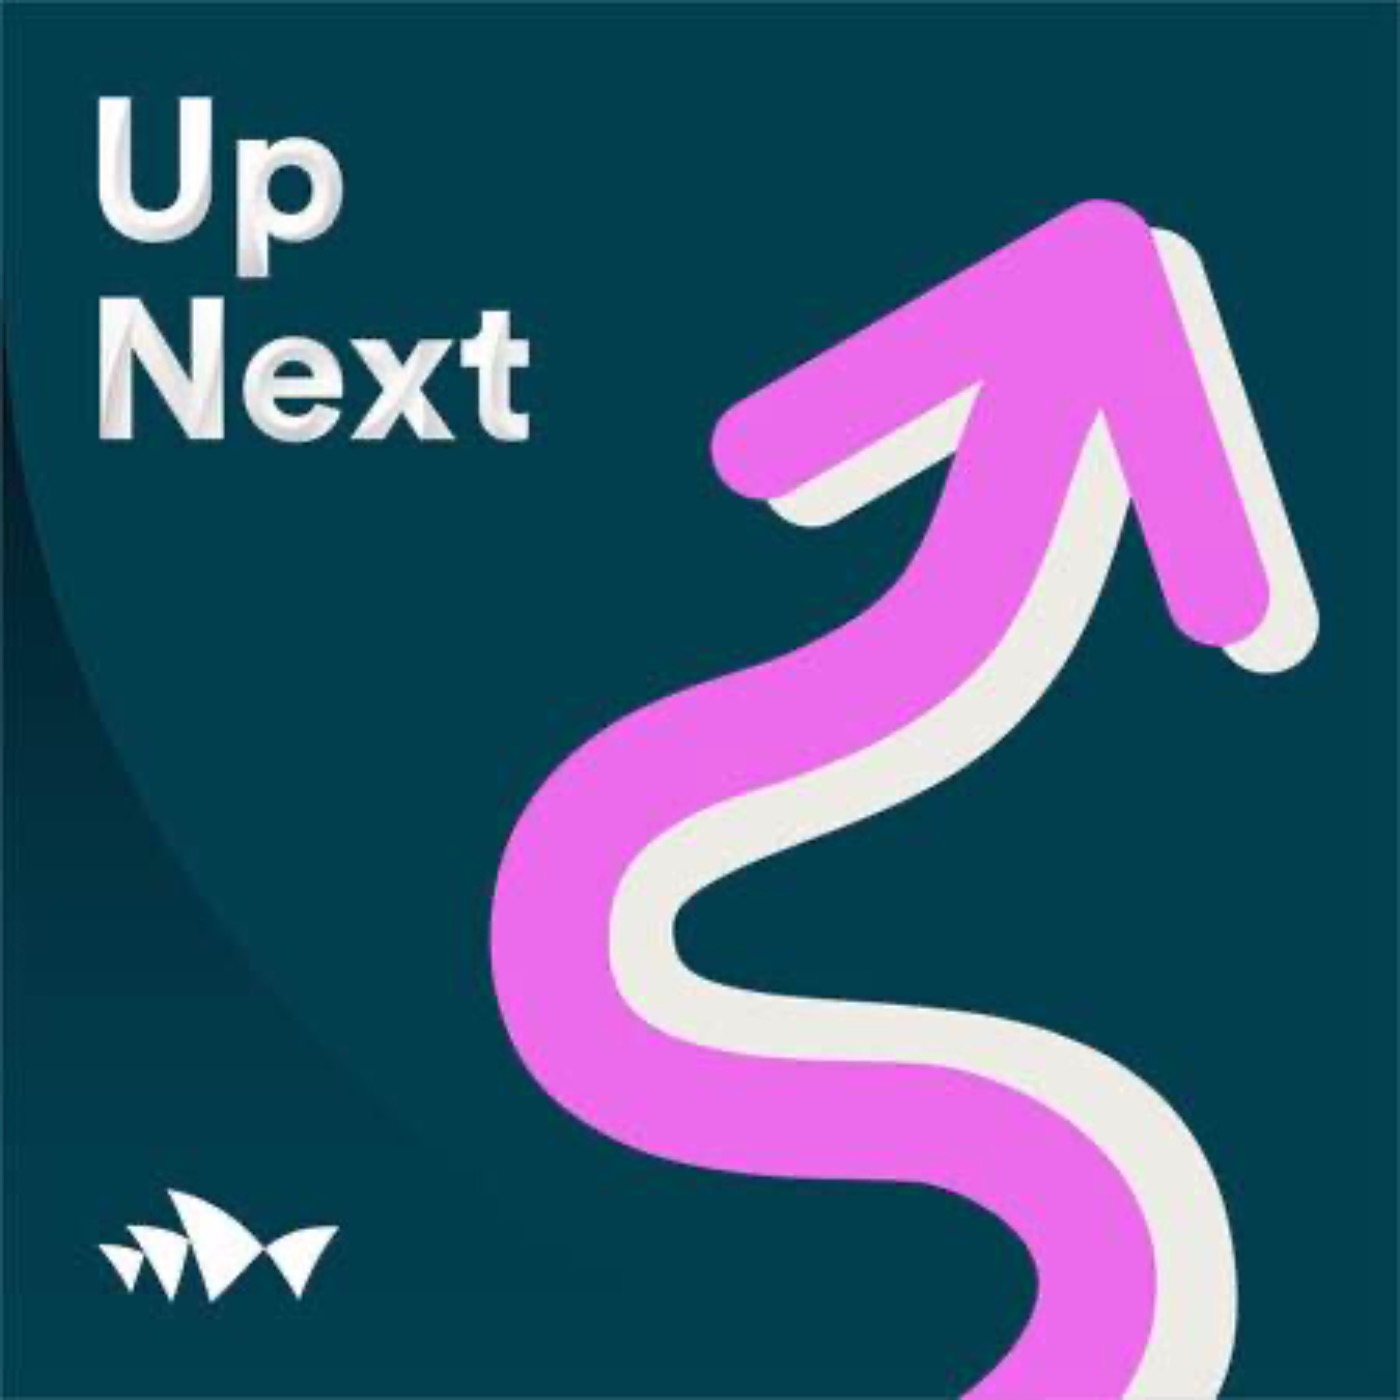 Bonus Episode  - Introducing our new podcast ’Up Next’